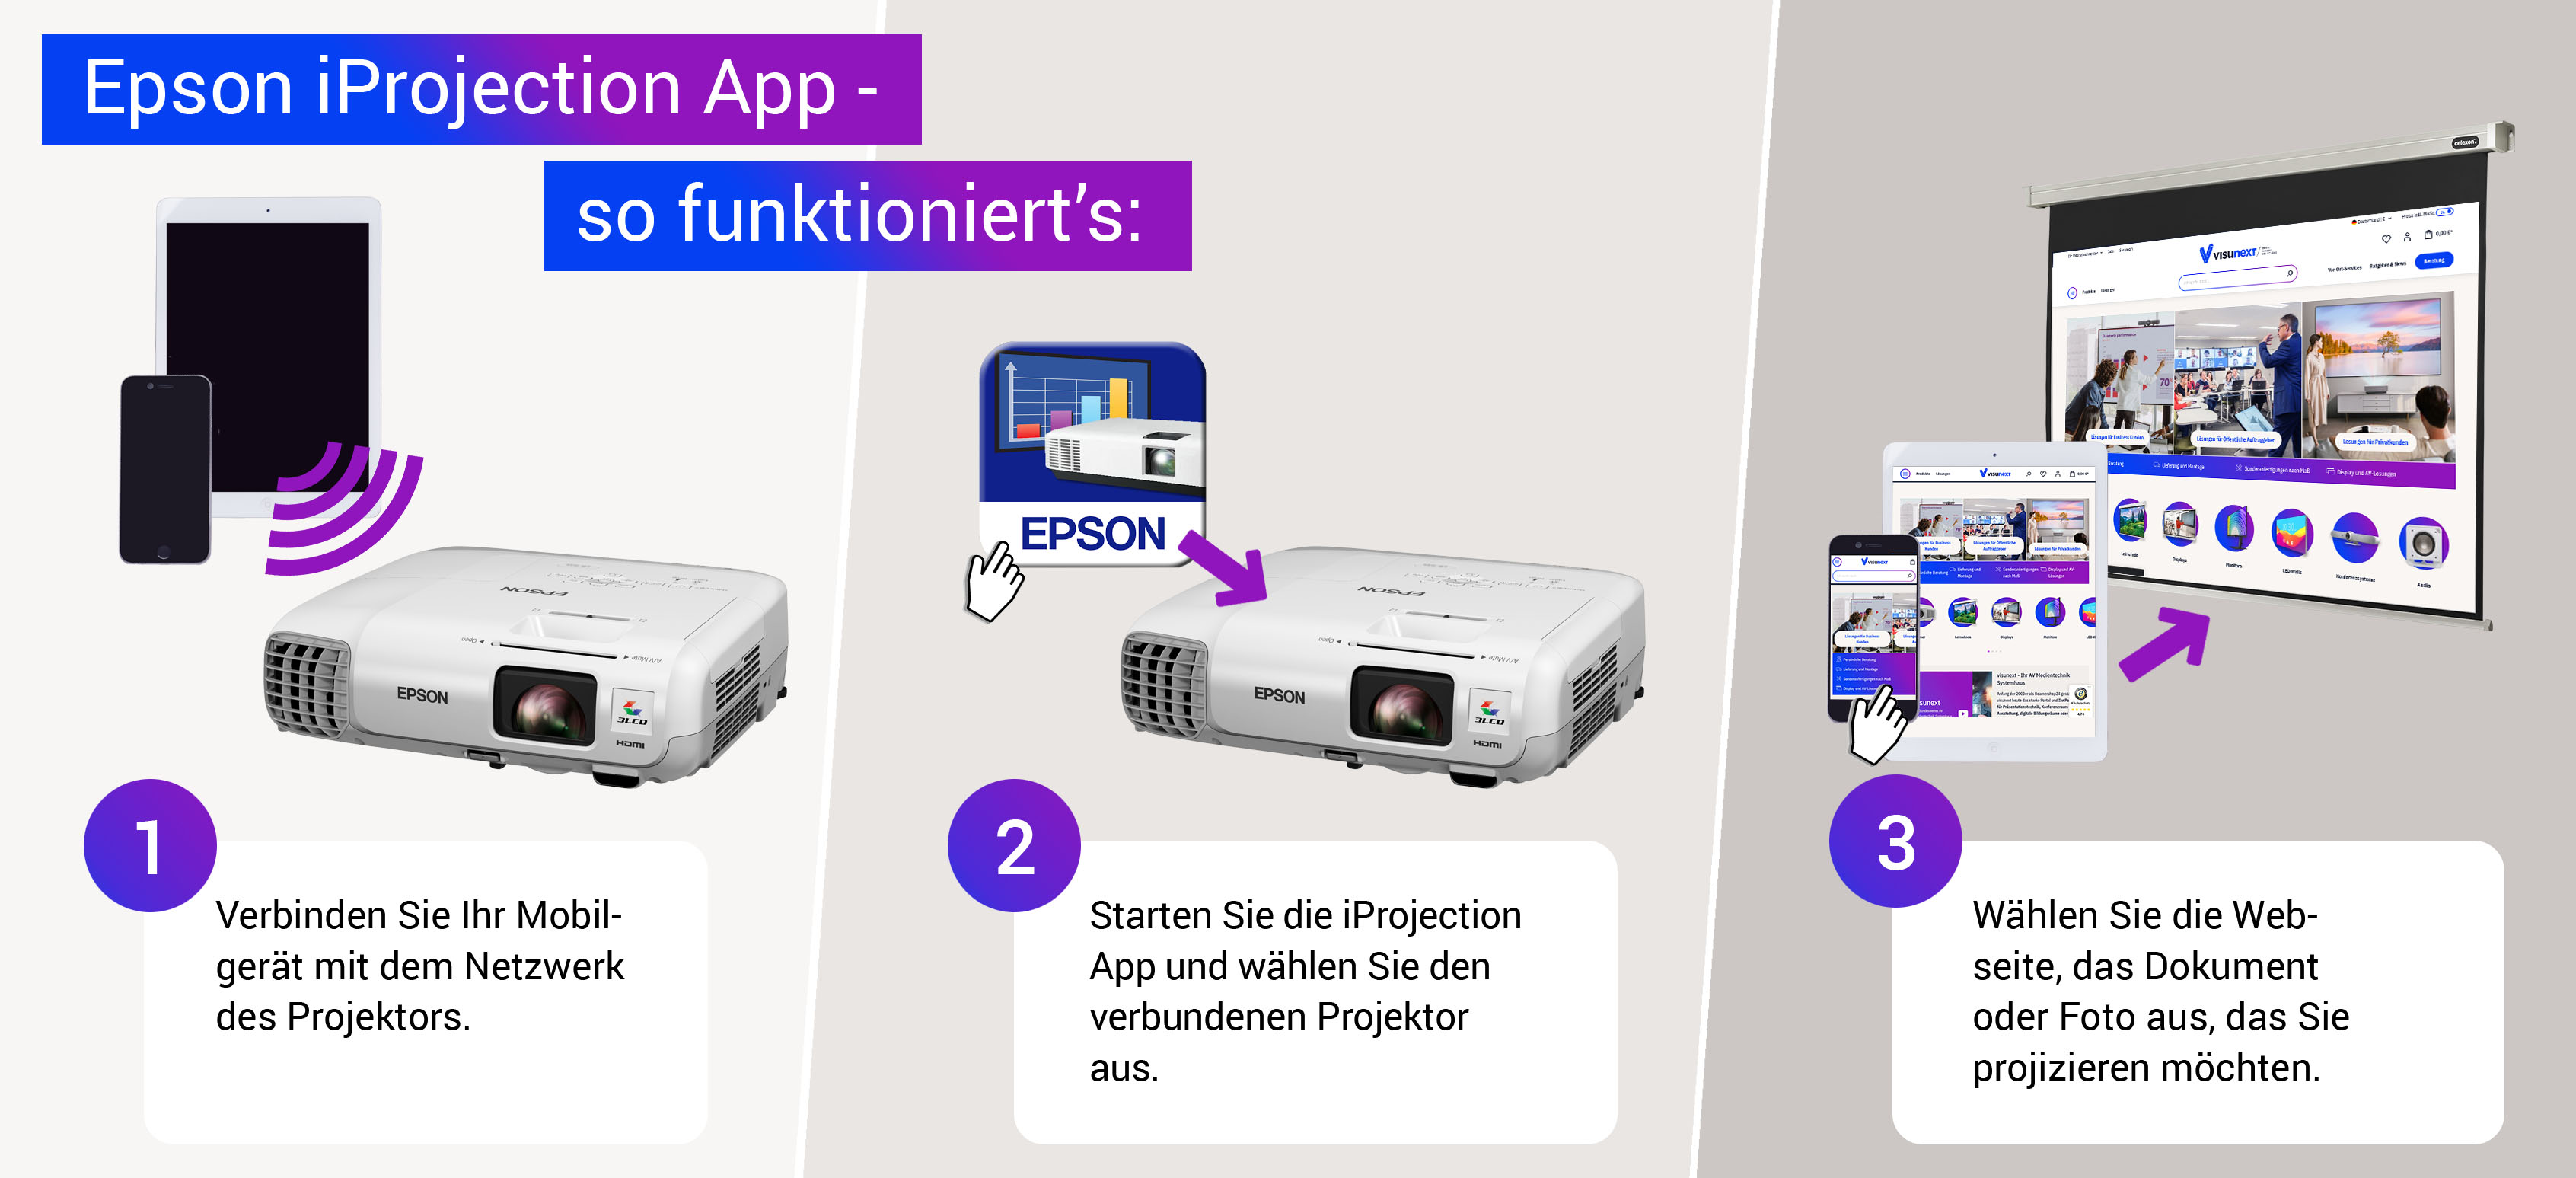 Epson iProjection App - so funktioniert's